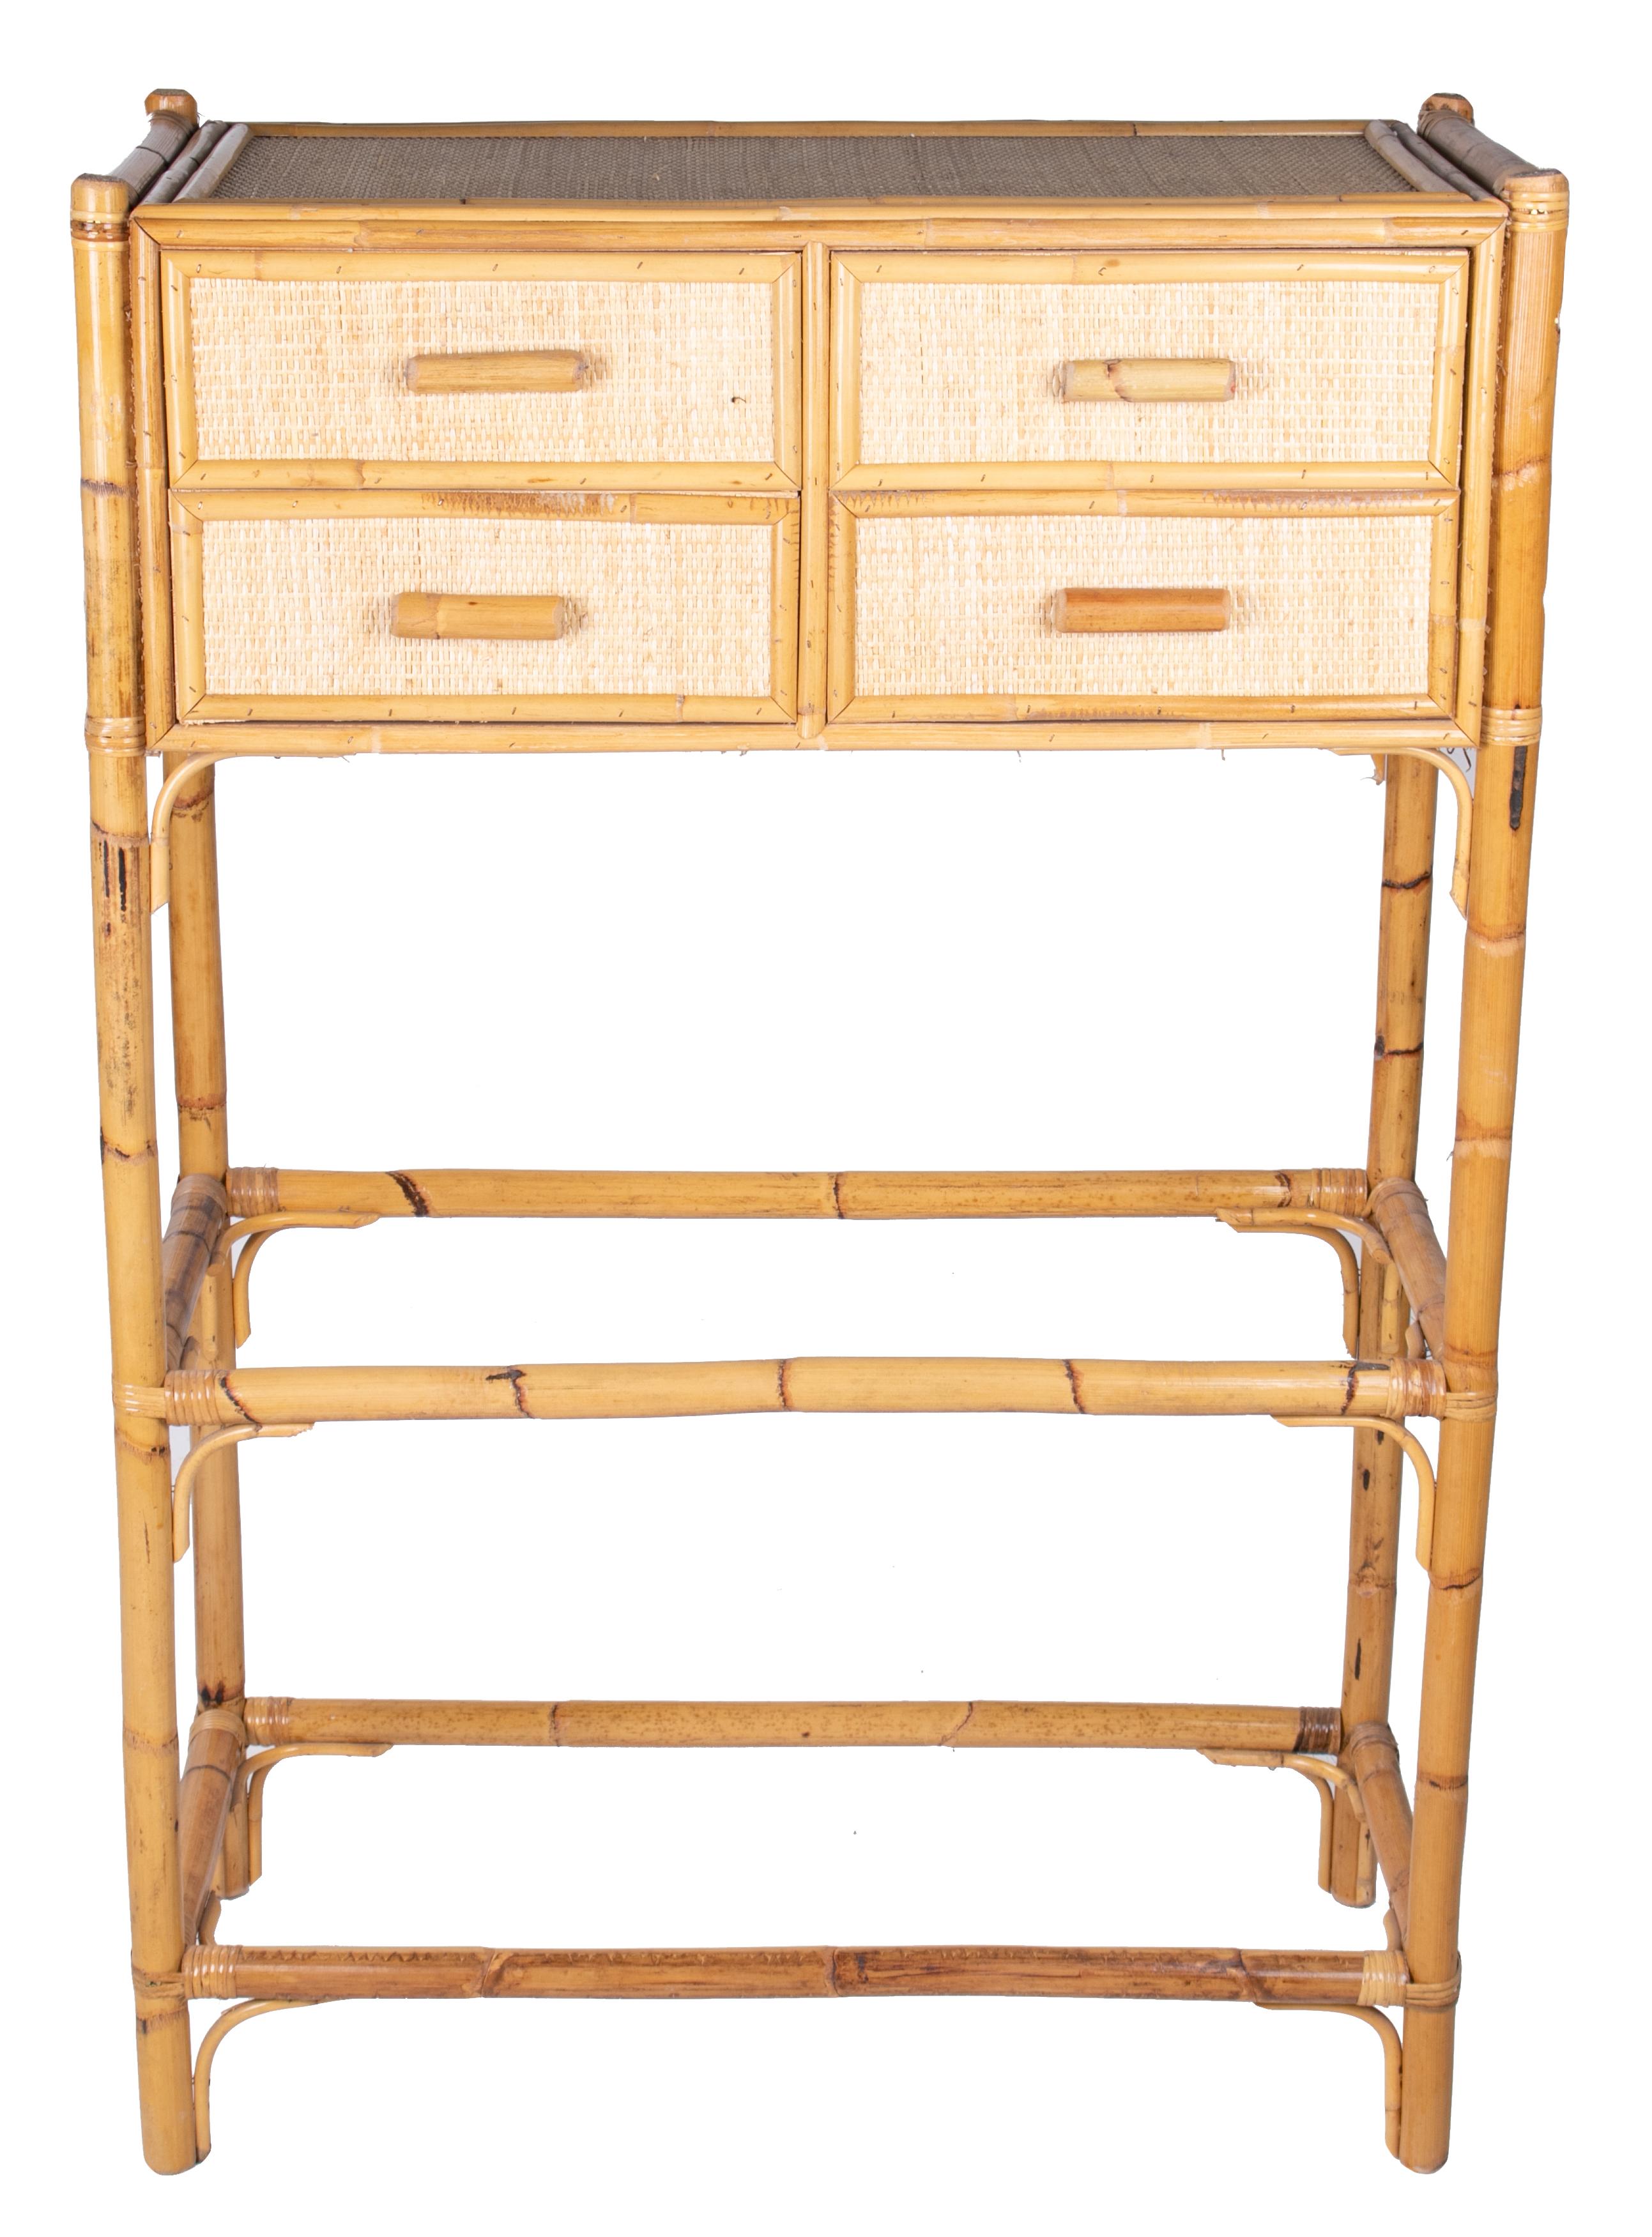 1980s Spanish bamboo and rattan four drawer chest with two bottom shelves.